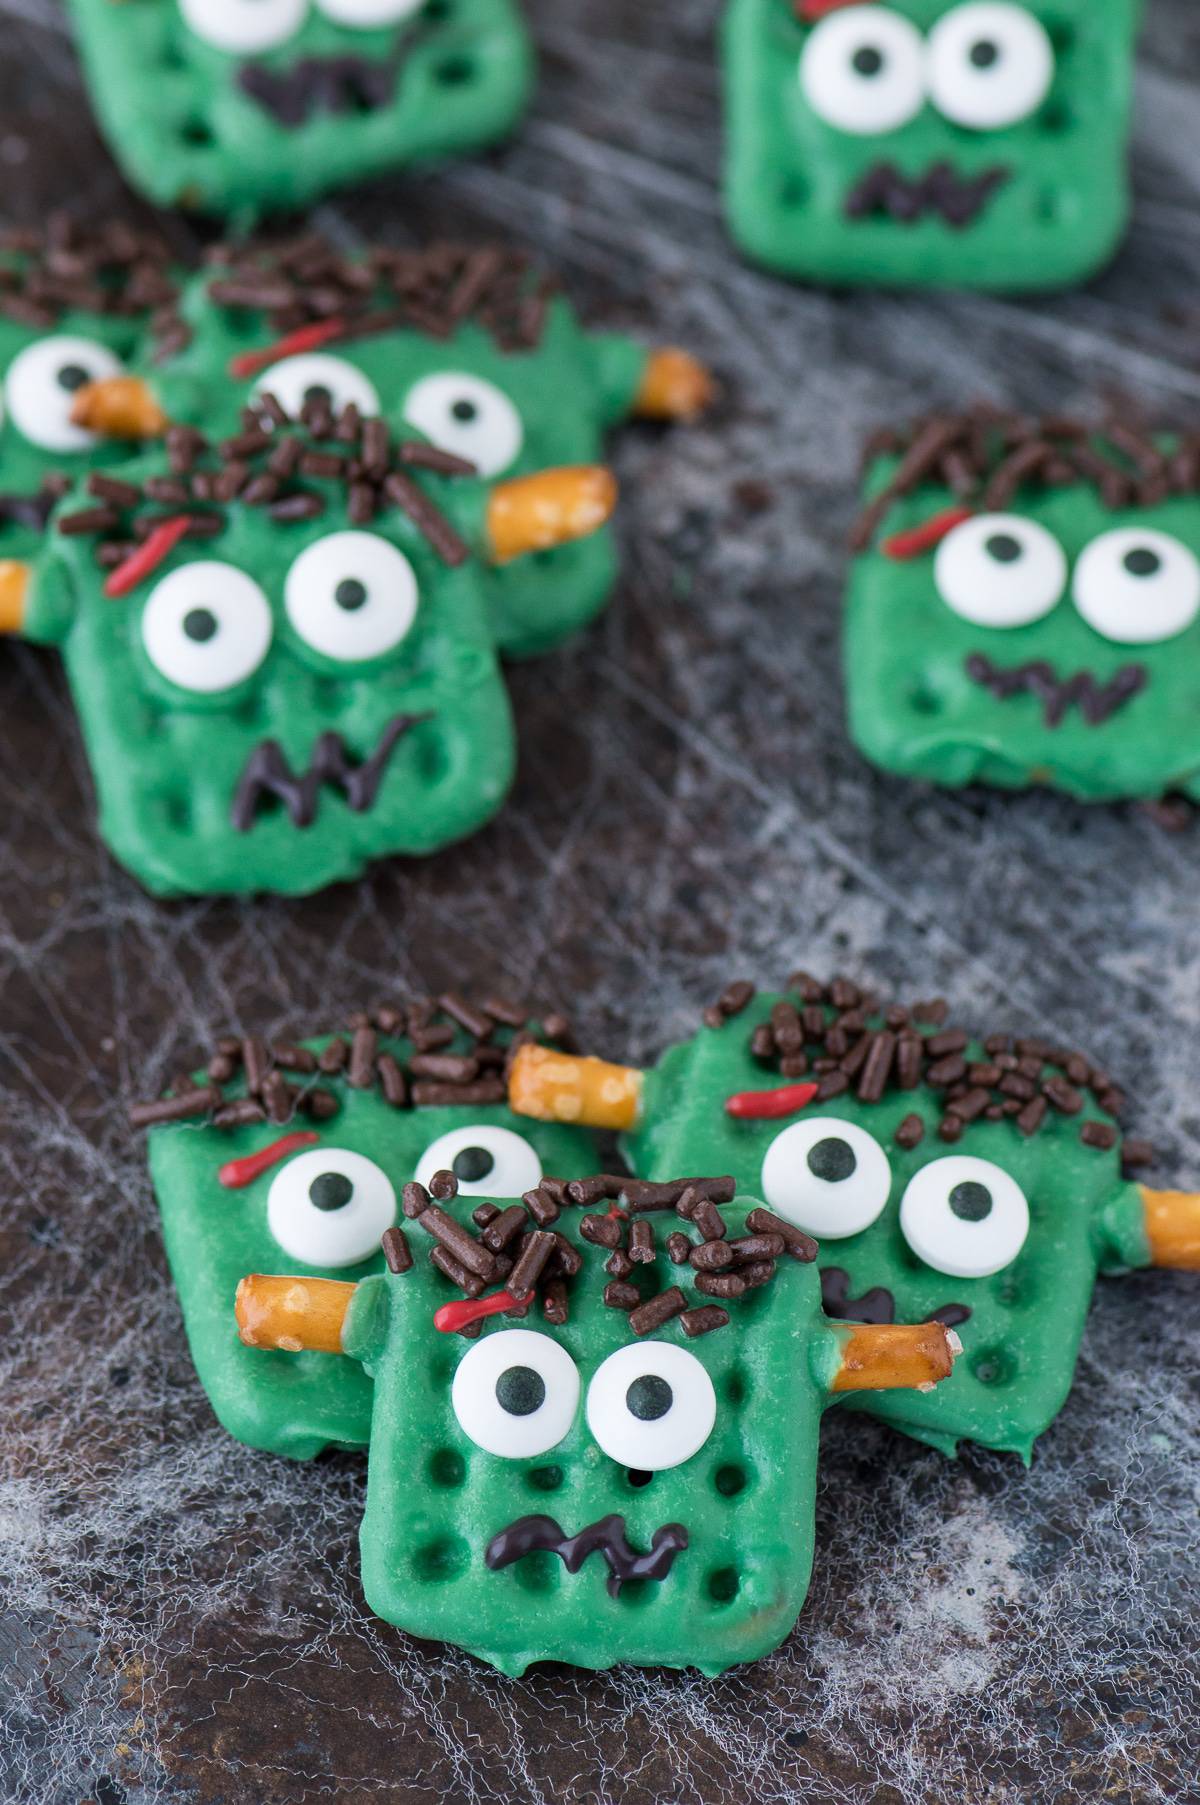 frankenstein treats made out of square waffle pretzels dipped in green chocolate with decorative embellishments on dark background